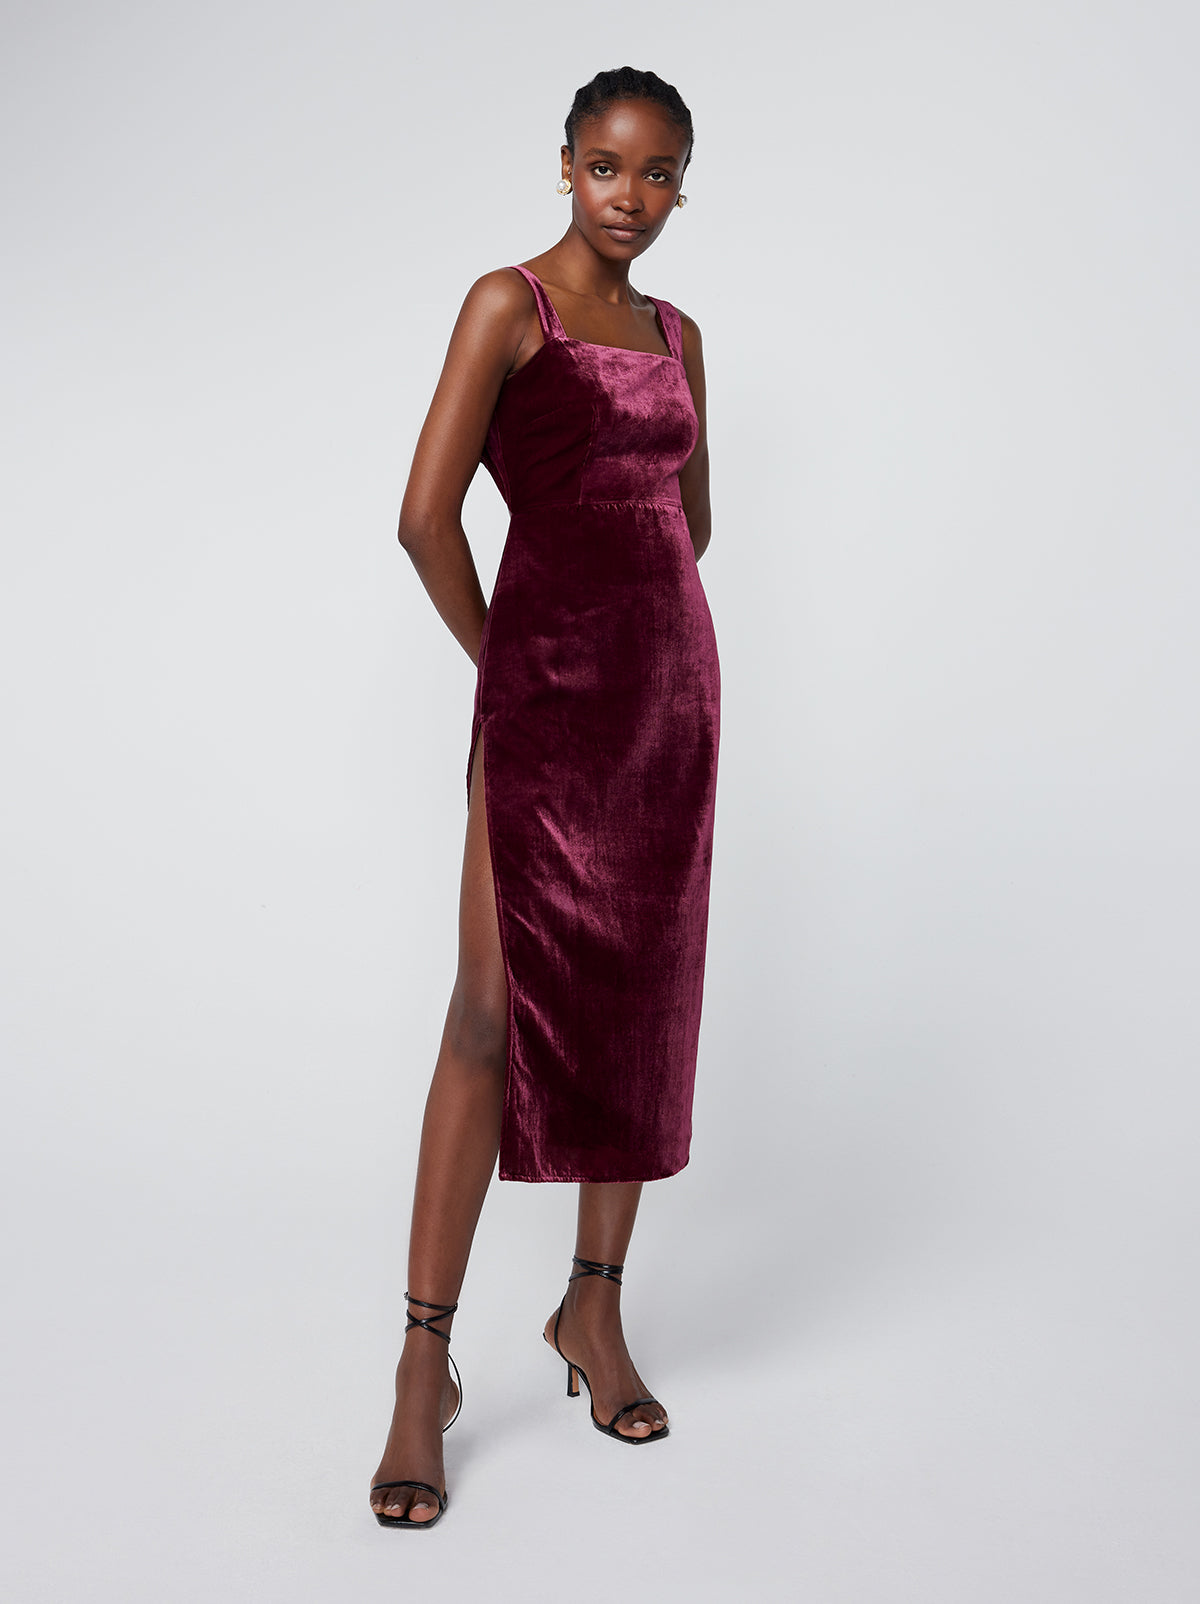 SALE- Burgundy Velvet Swing Dress with Pockets – Classy Cowgirl Co.